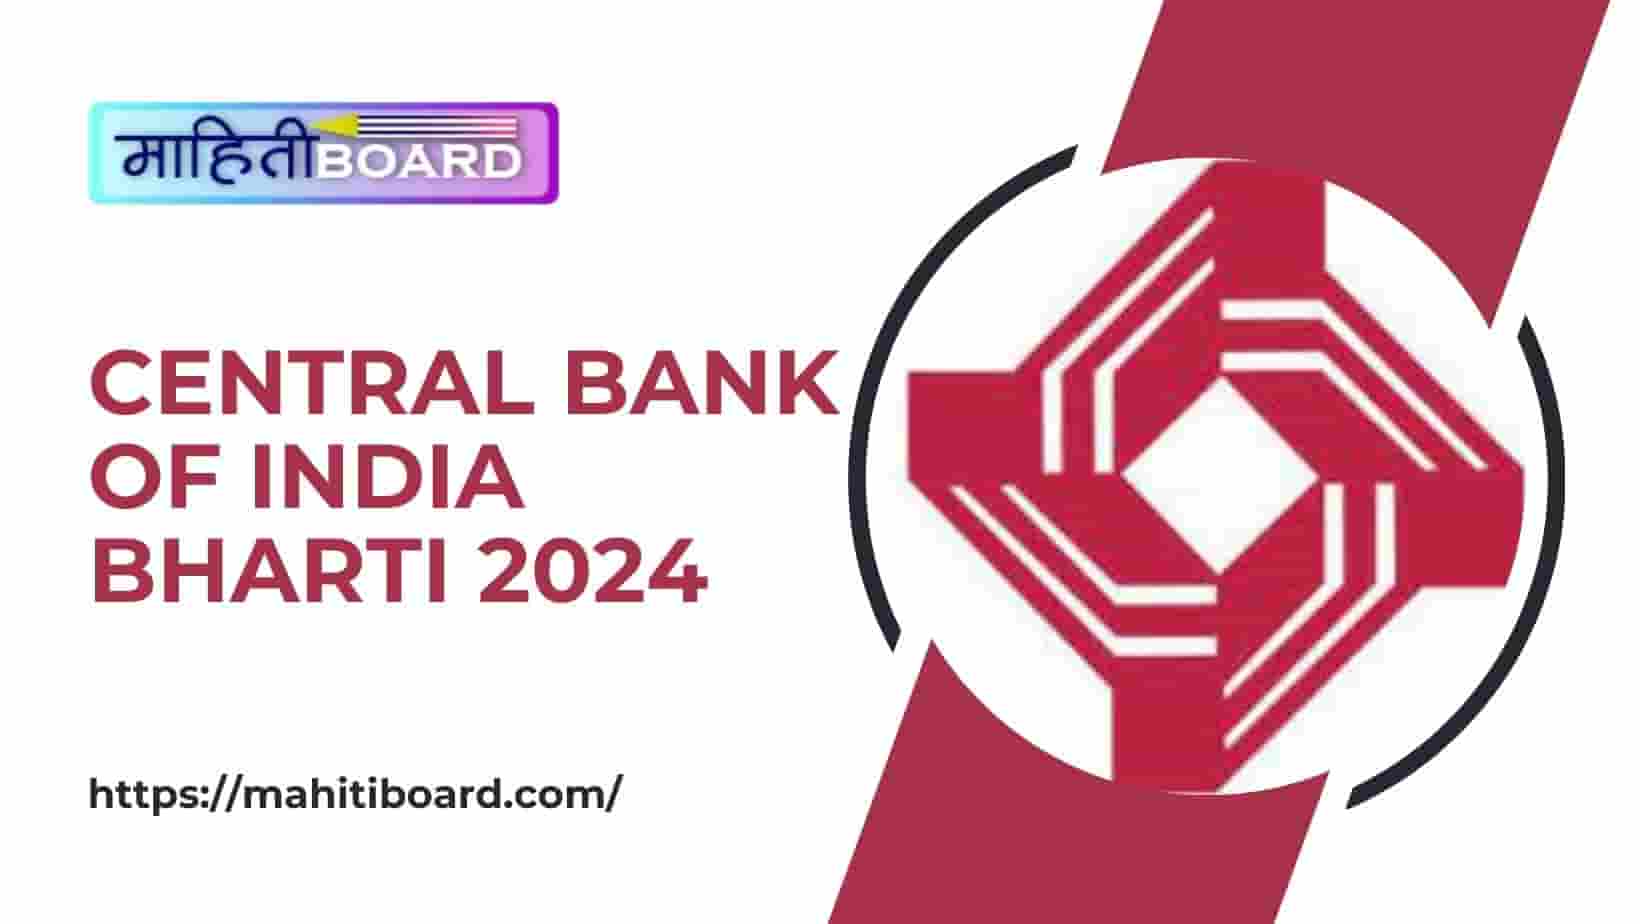 Central Bank of India Bharti 2024